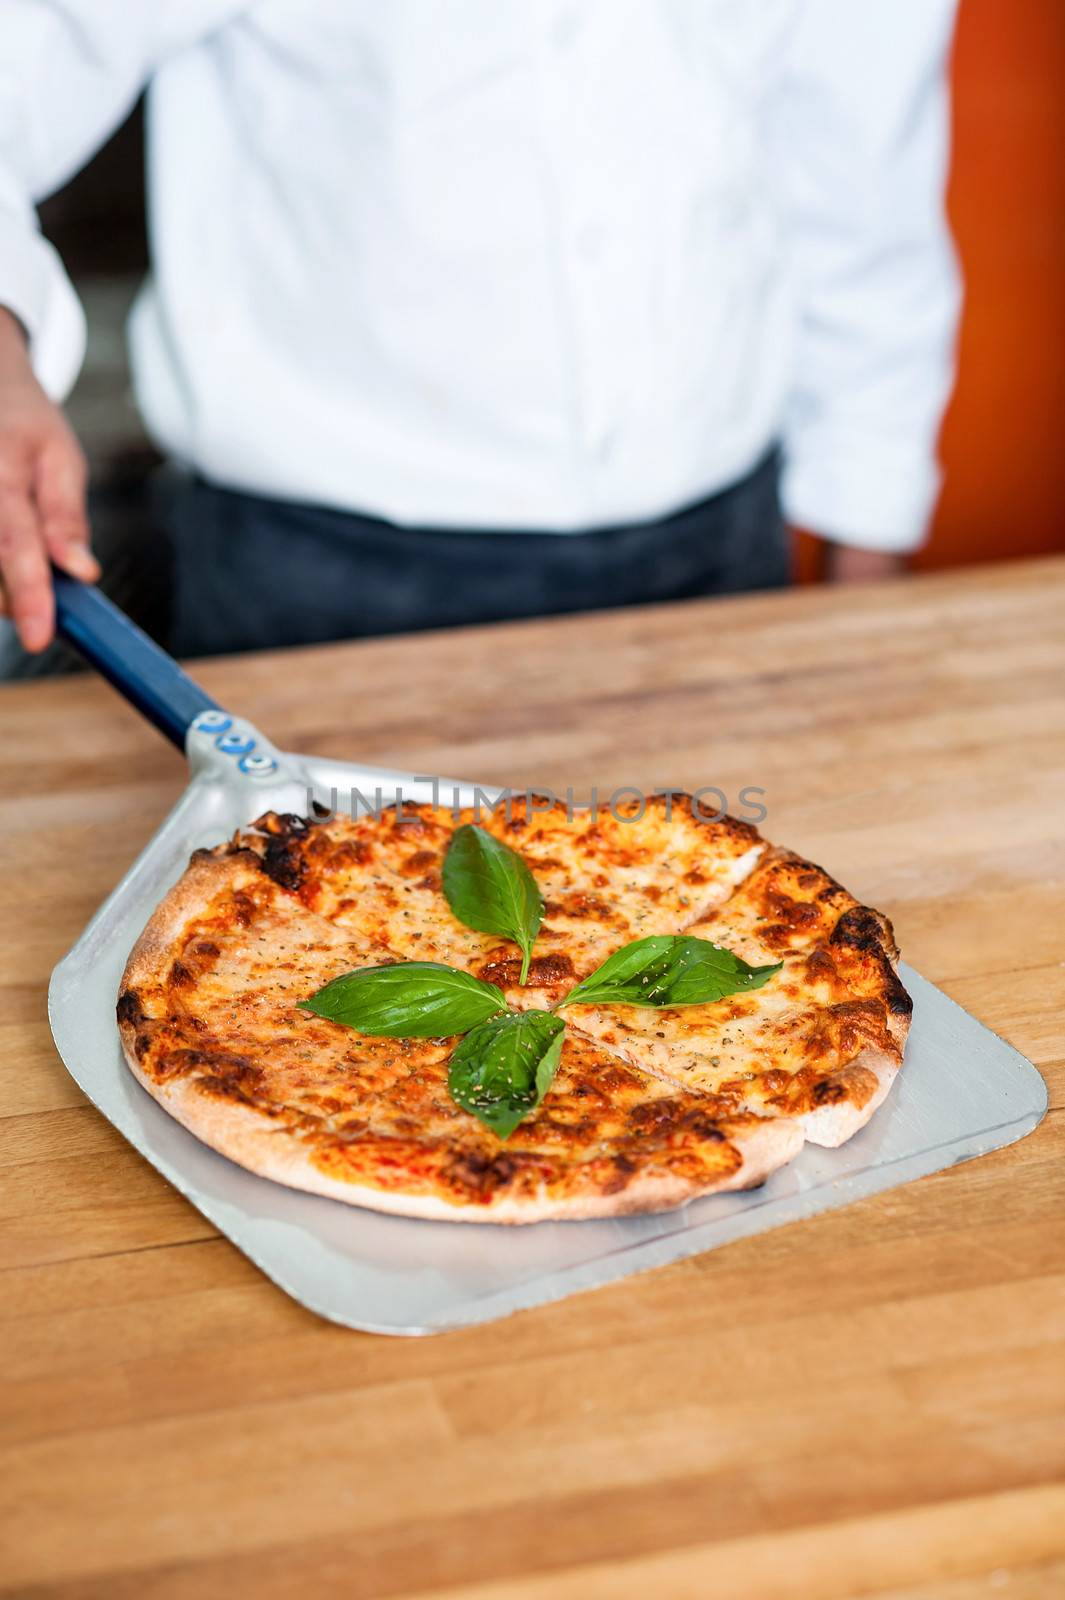 Cropped image of a chef preparing pizza